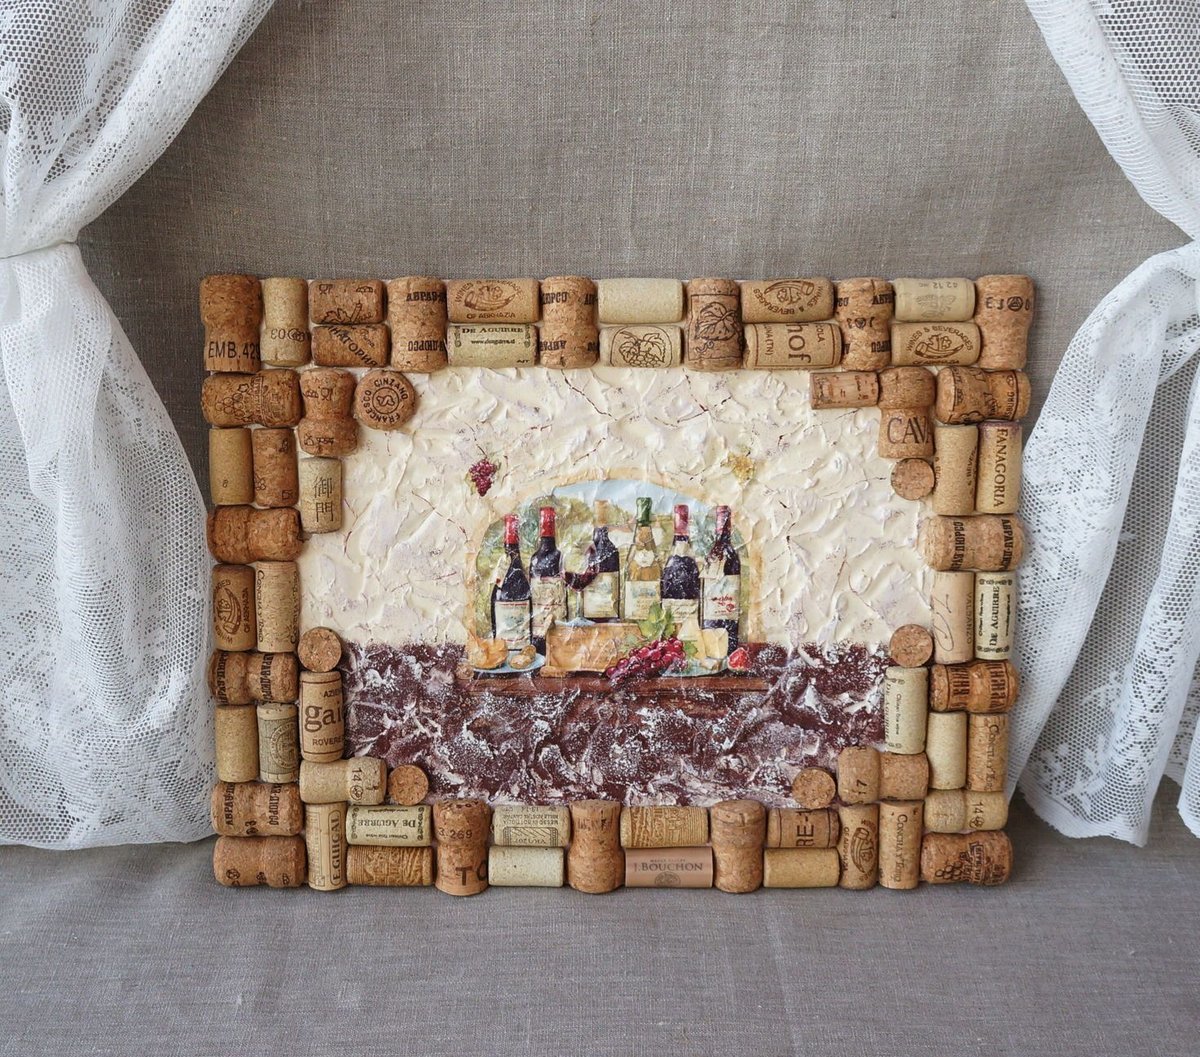 How to Make a DIY Picture Frame – Step-by-Step Guide -- Picture frame from wine-corks. You're not drinking too much wine -- you're just preparing the material for a nice picture frame